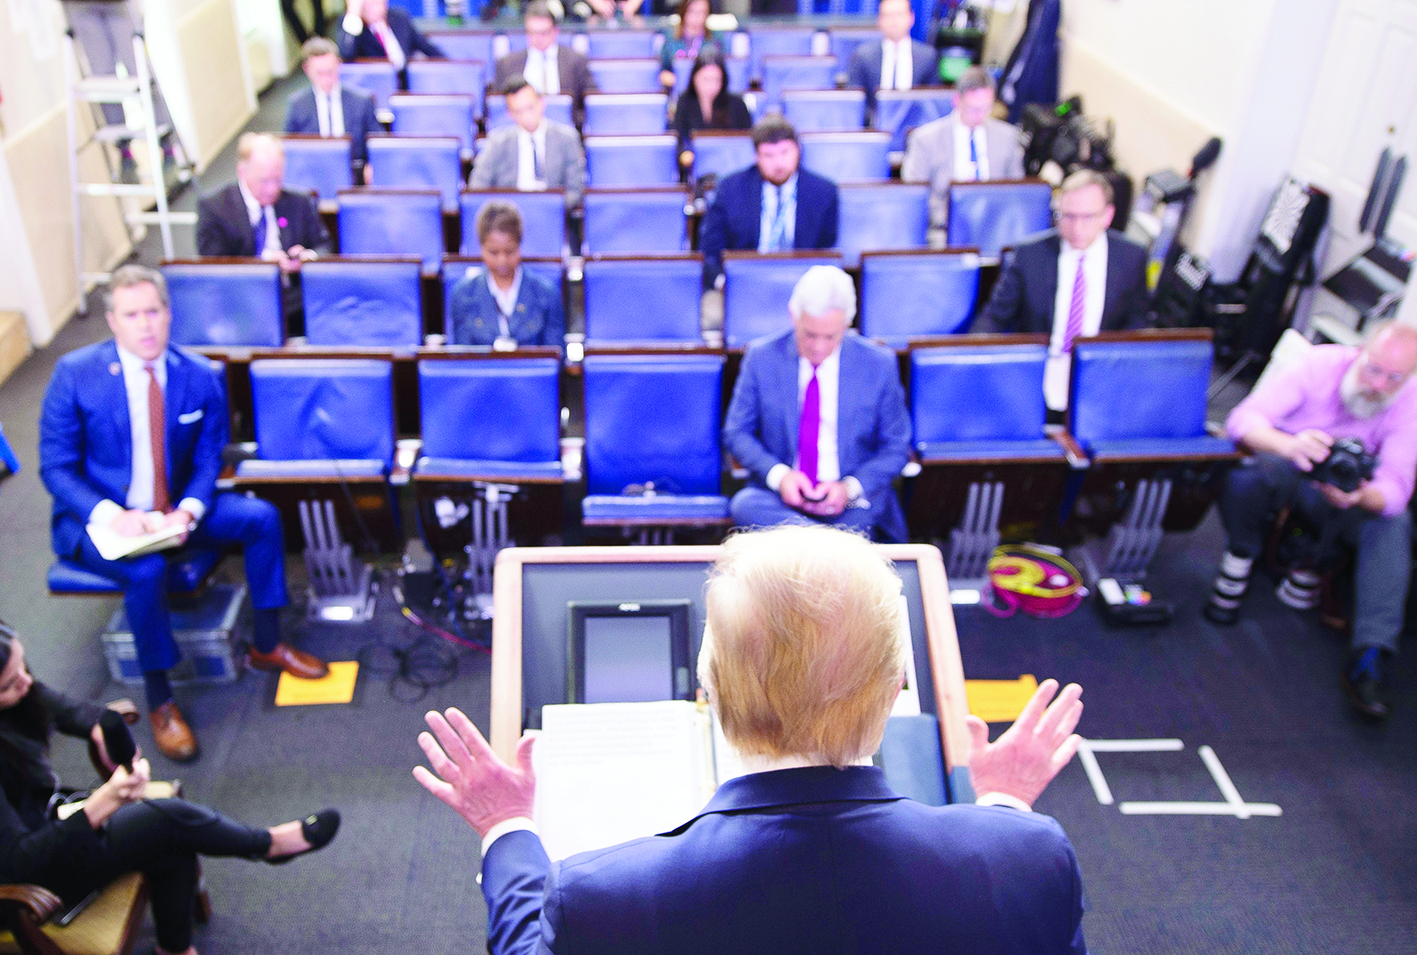 US President Donald Trump gestures as he speaks during the daily briefing on the novel coronavirus, COVID-19, in the Brady Briefing Room at the White House on March 27, 2020, in Washington, DC. (Photo by JIM WATSON / AFP)